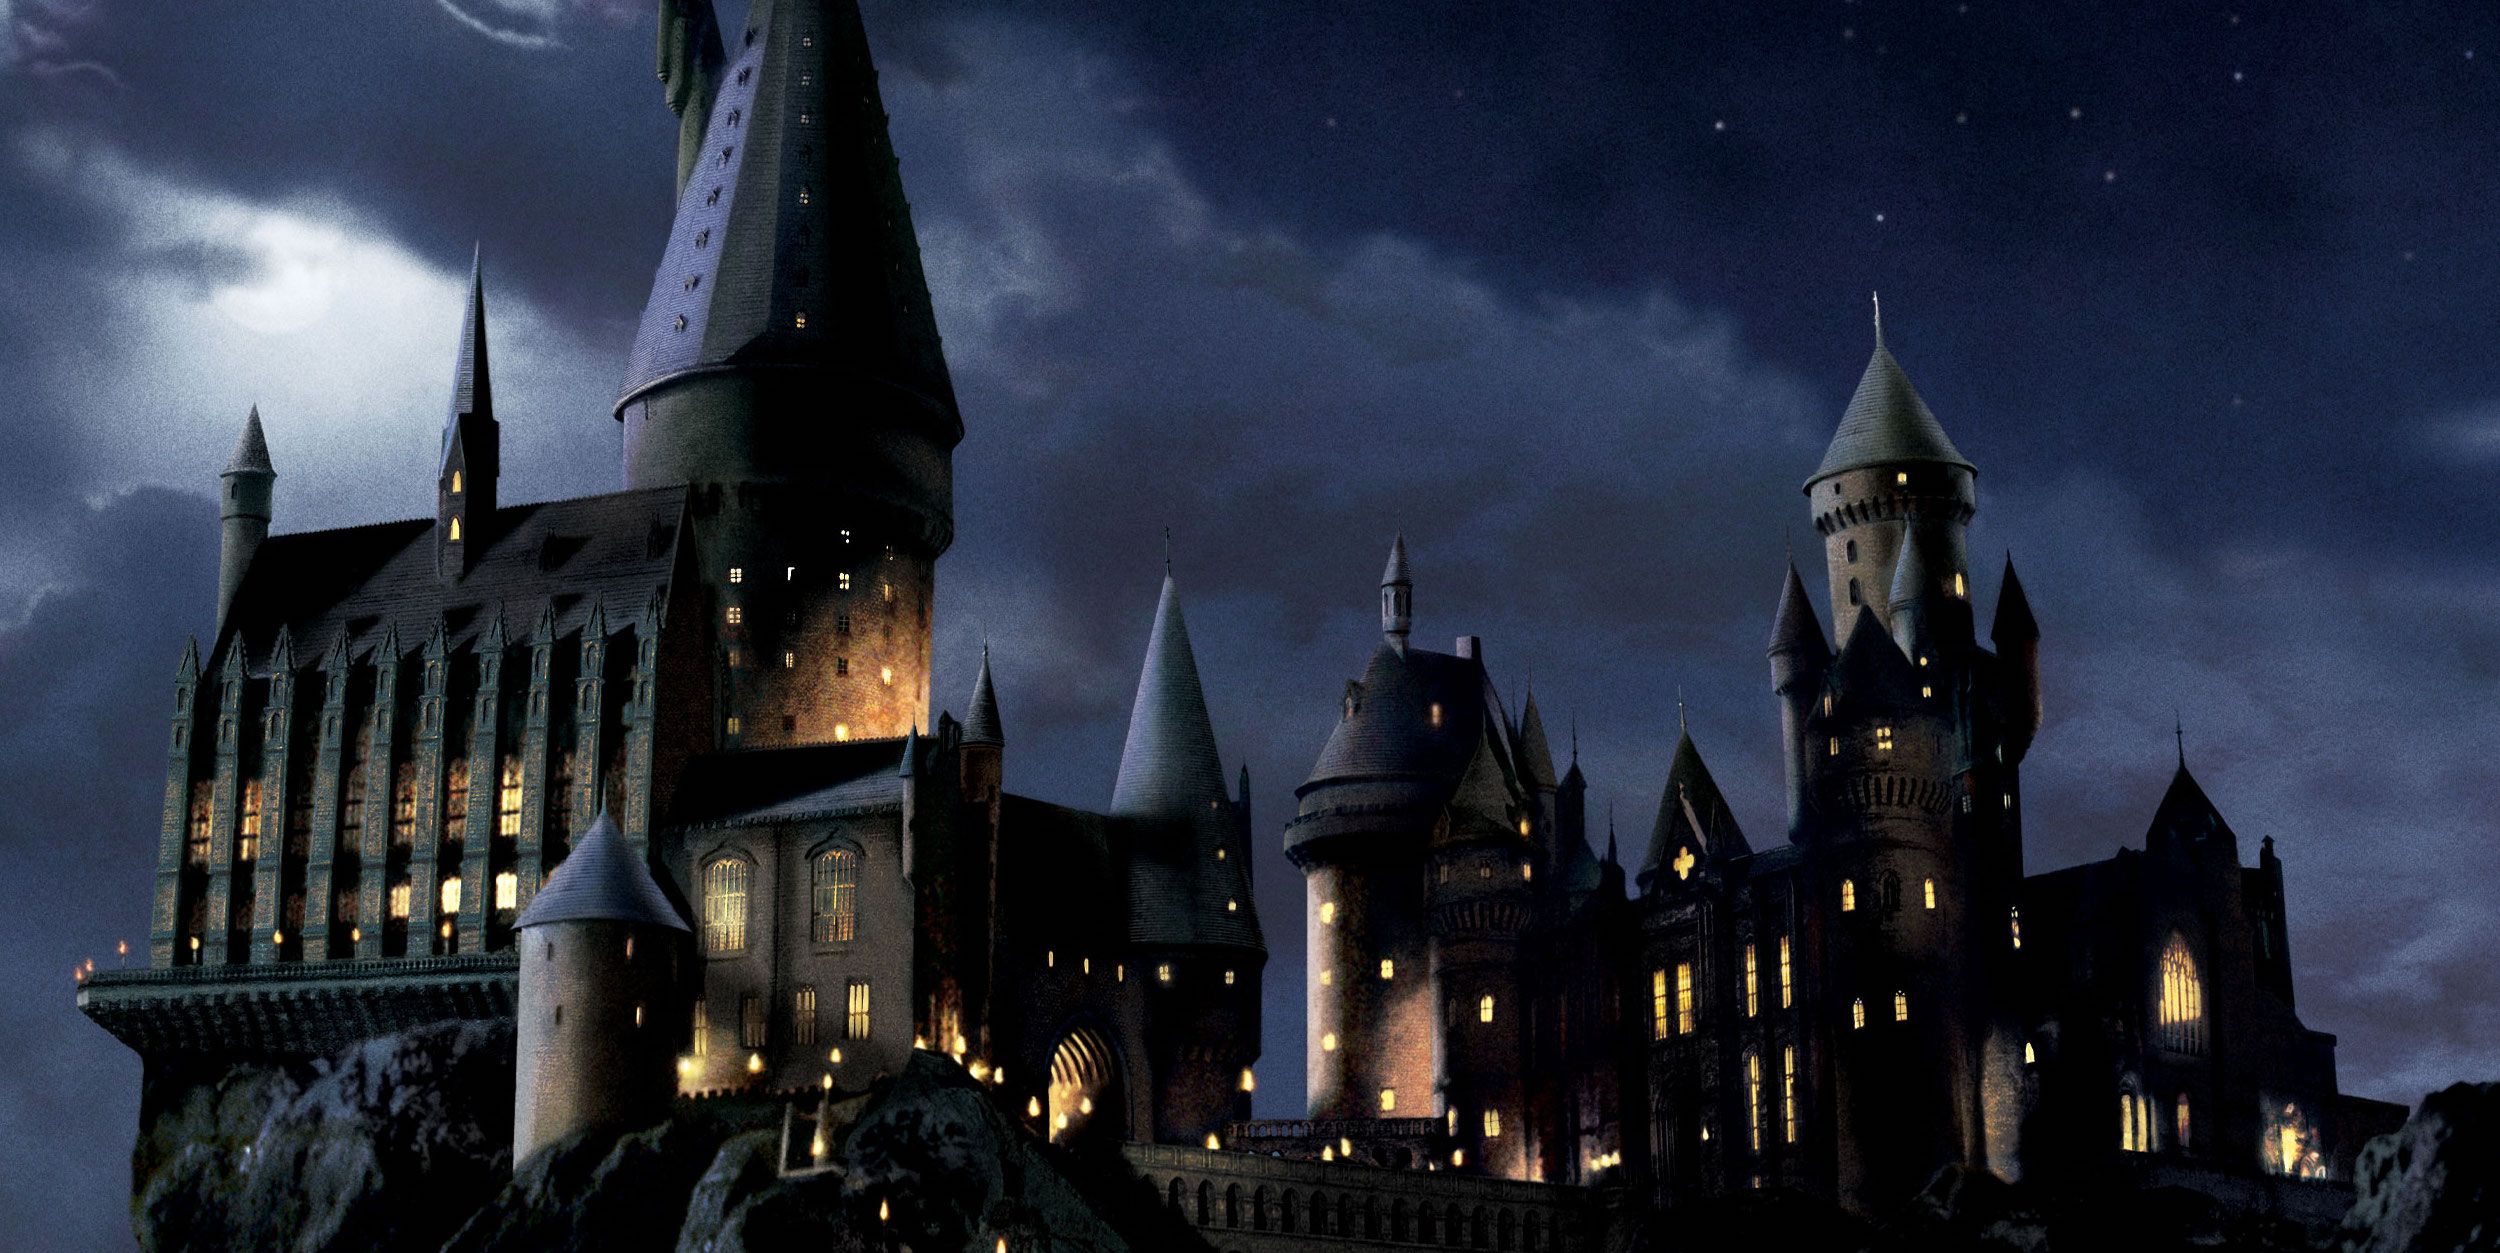 how many years does hogwarts legacy take place